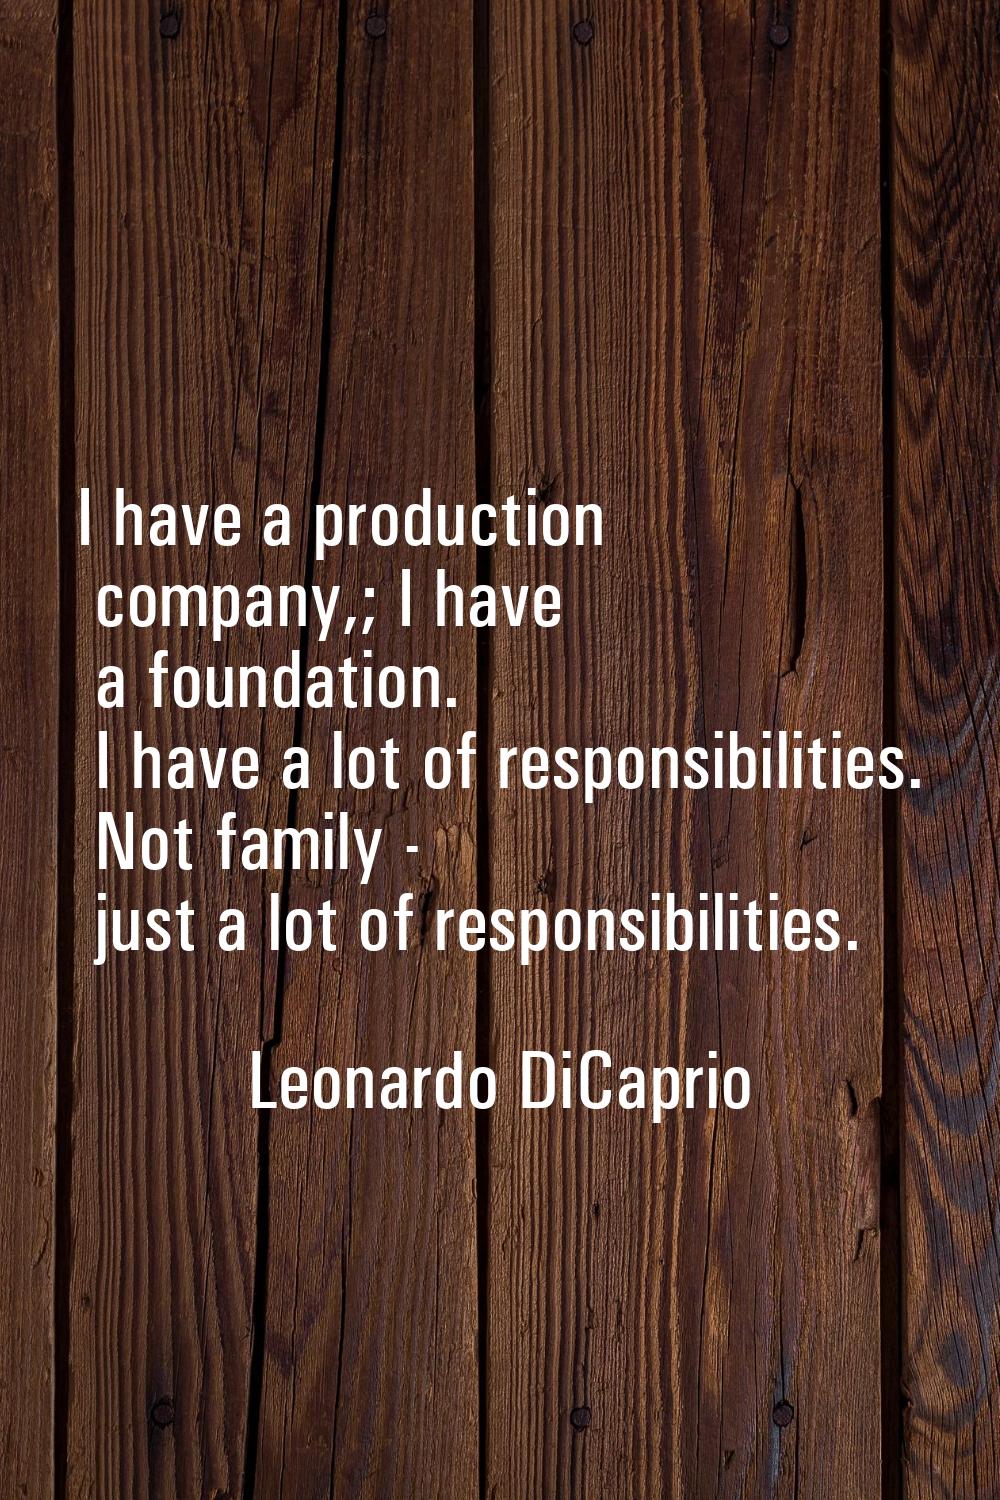 I have a production company,; I have a foundation. I have a lot of responsibilities. Not family - j